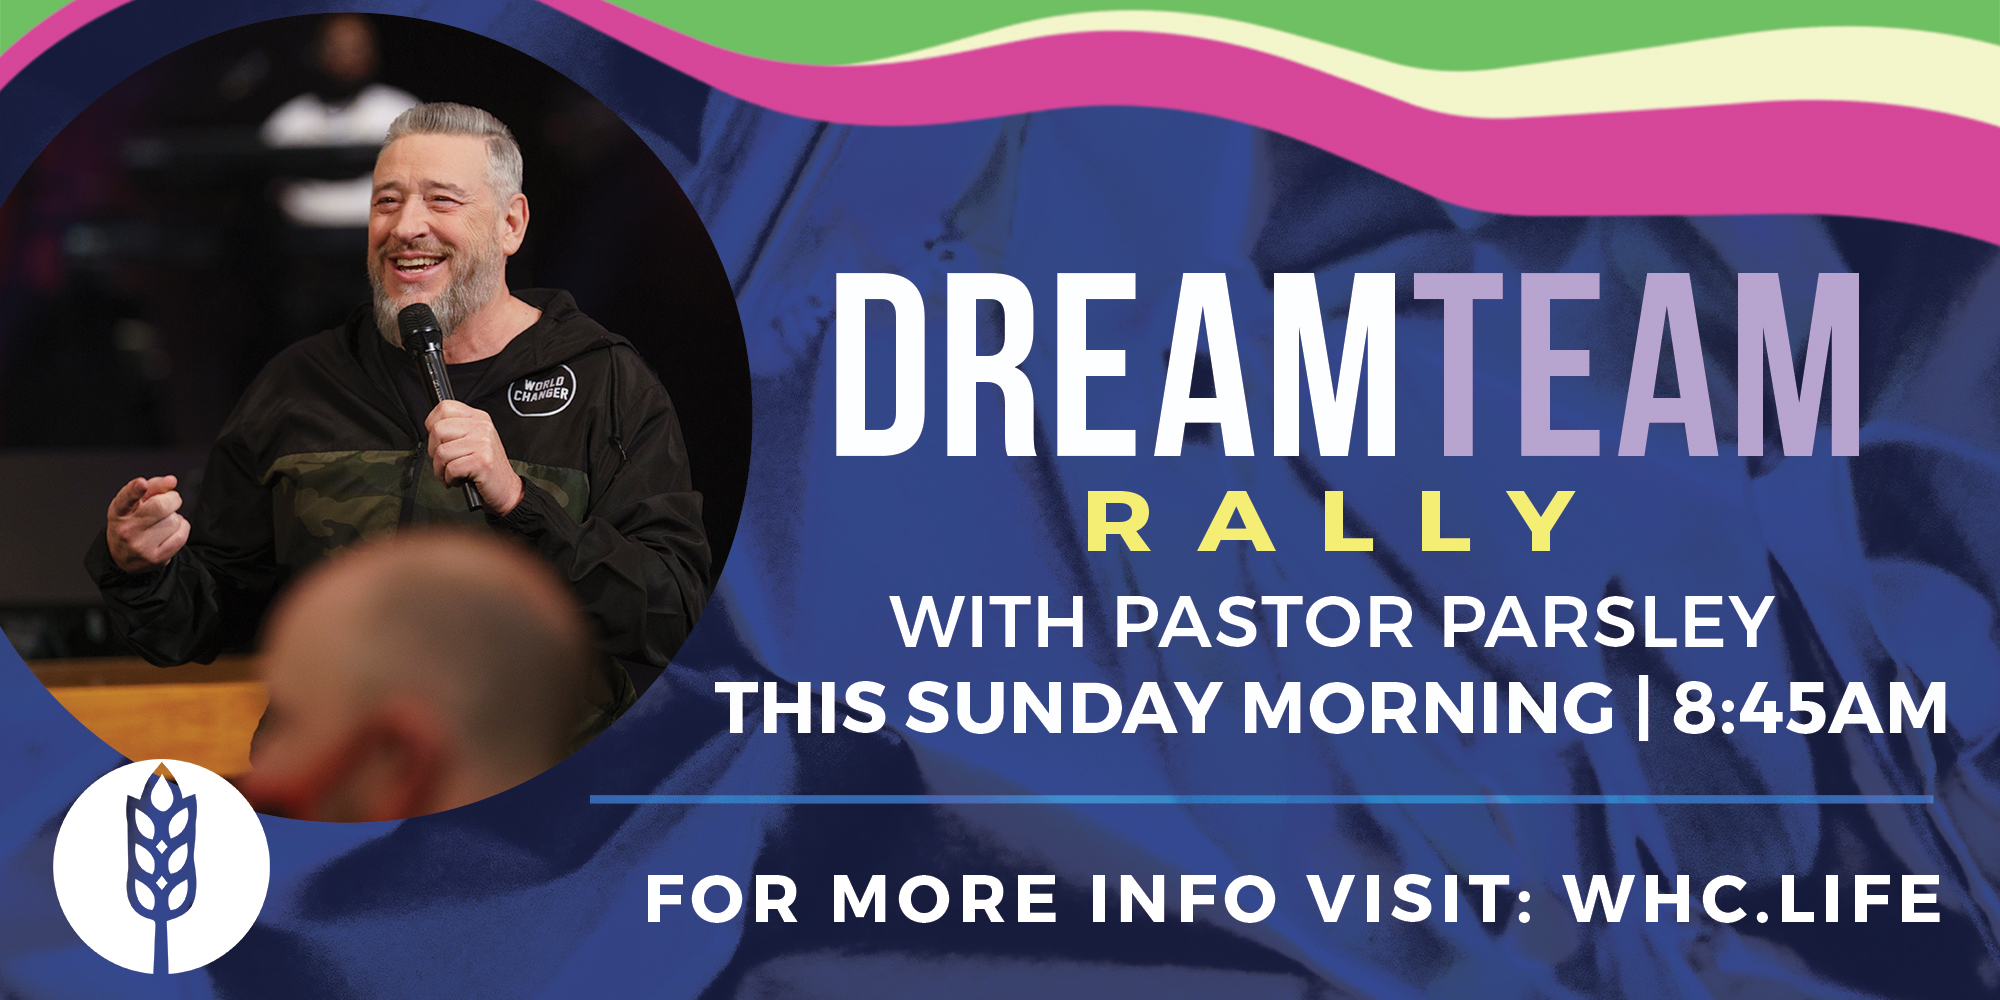 DreamTEAM Rally Sundays with Pastor Parsley